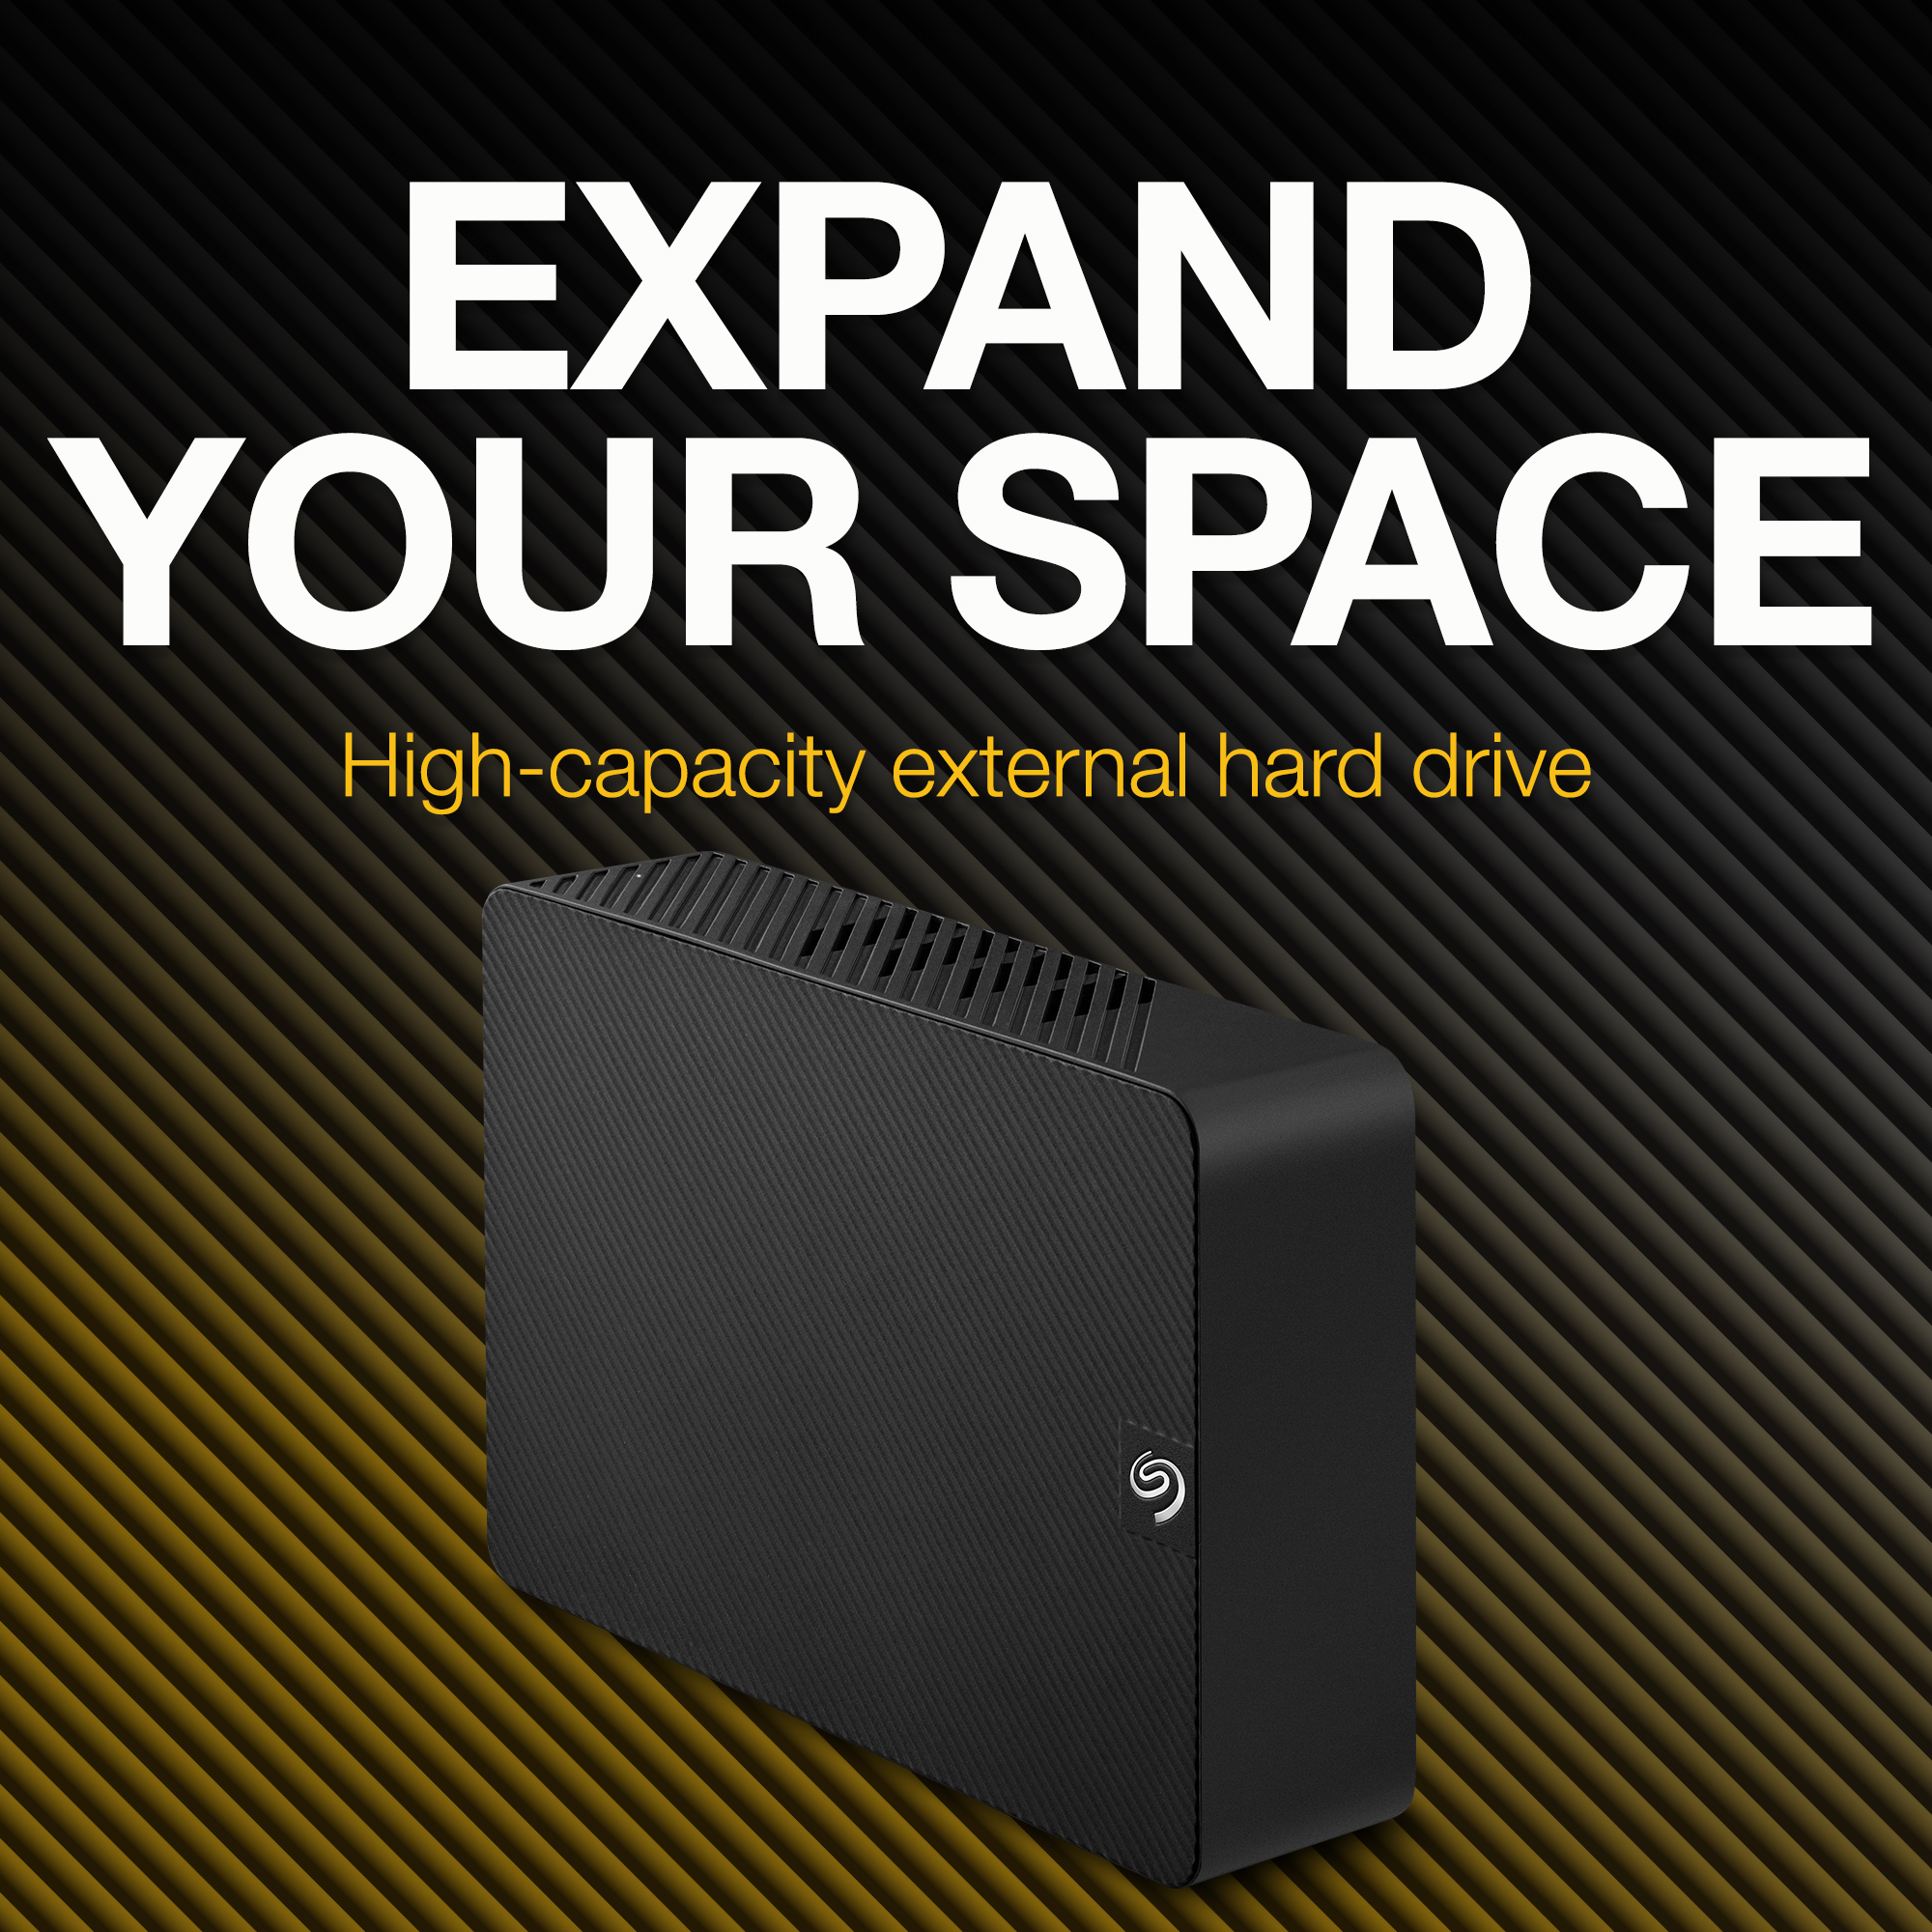 Seagate Expansion 18TB External USB 3.0 Hard Drive with Resue Data Recovery Services - Black (STKP18000400) - image 5 of 7